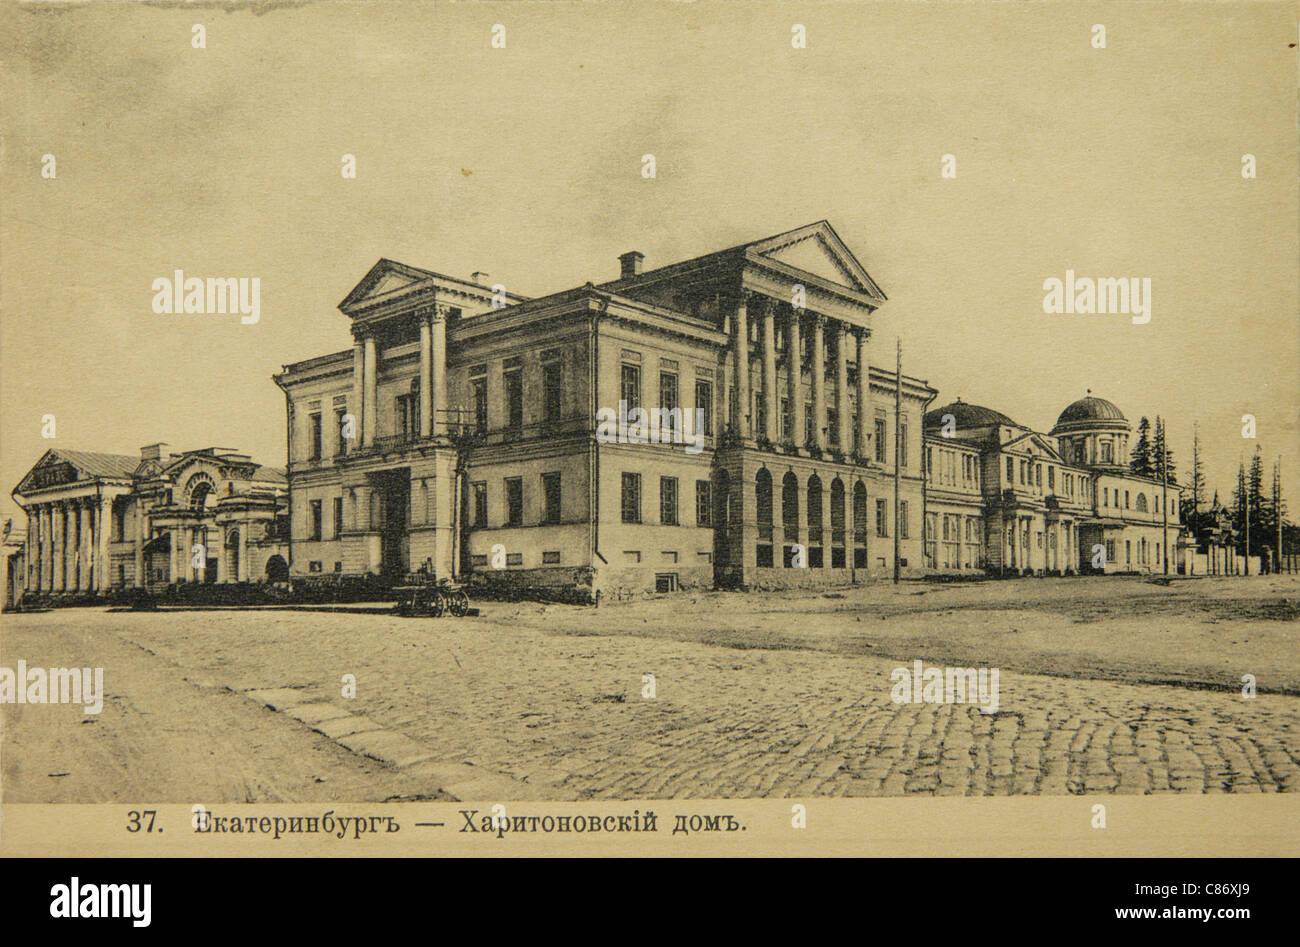 Kharitovnov Palace in Yekaterinburg, Russian Empire. Black and white vintage photograph by Russian photographer Veniamin Metenkov dated from the beginning of the 20th century issued in the Russian vintage postcard published by Veniamin Metenkov himself in Yekaterinburg. Text in Russian: Yekaterinburg. Kharitovnov House. Courtesy of the Azoor Postcard Collection. Stock Photo